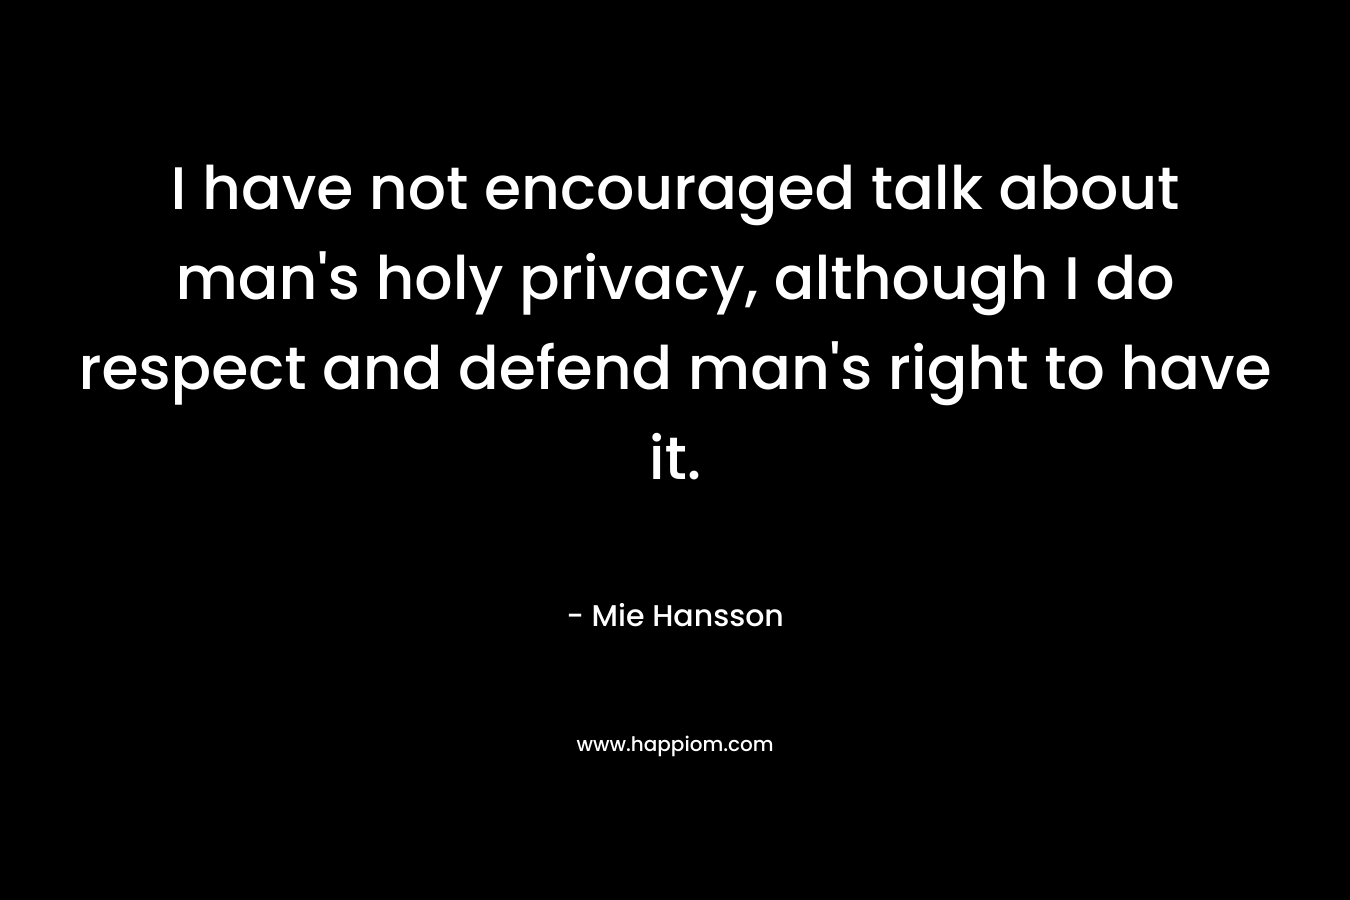 I have not encouraged talk about man’s holy privacy, although I do respect and defend man’s right to have it. – Mie Hansson